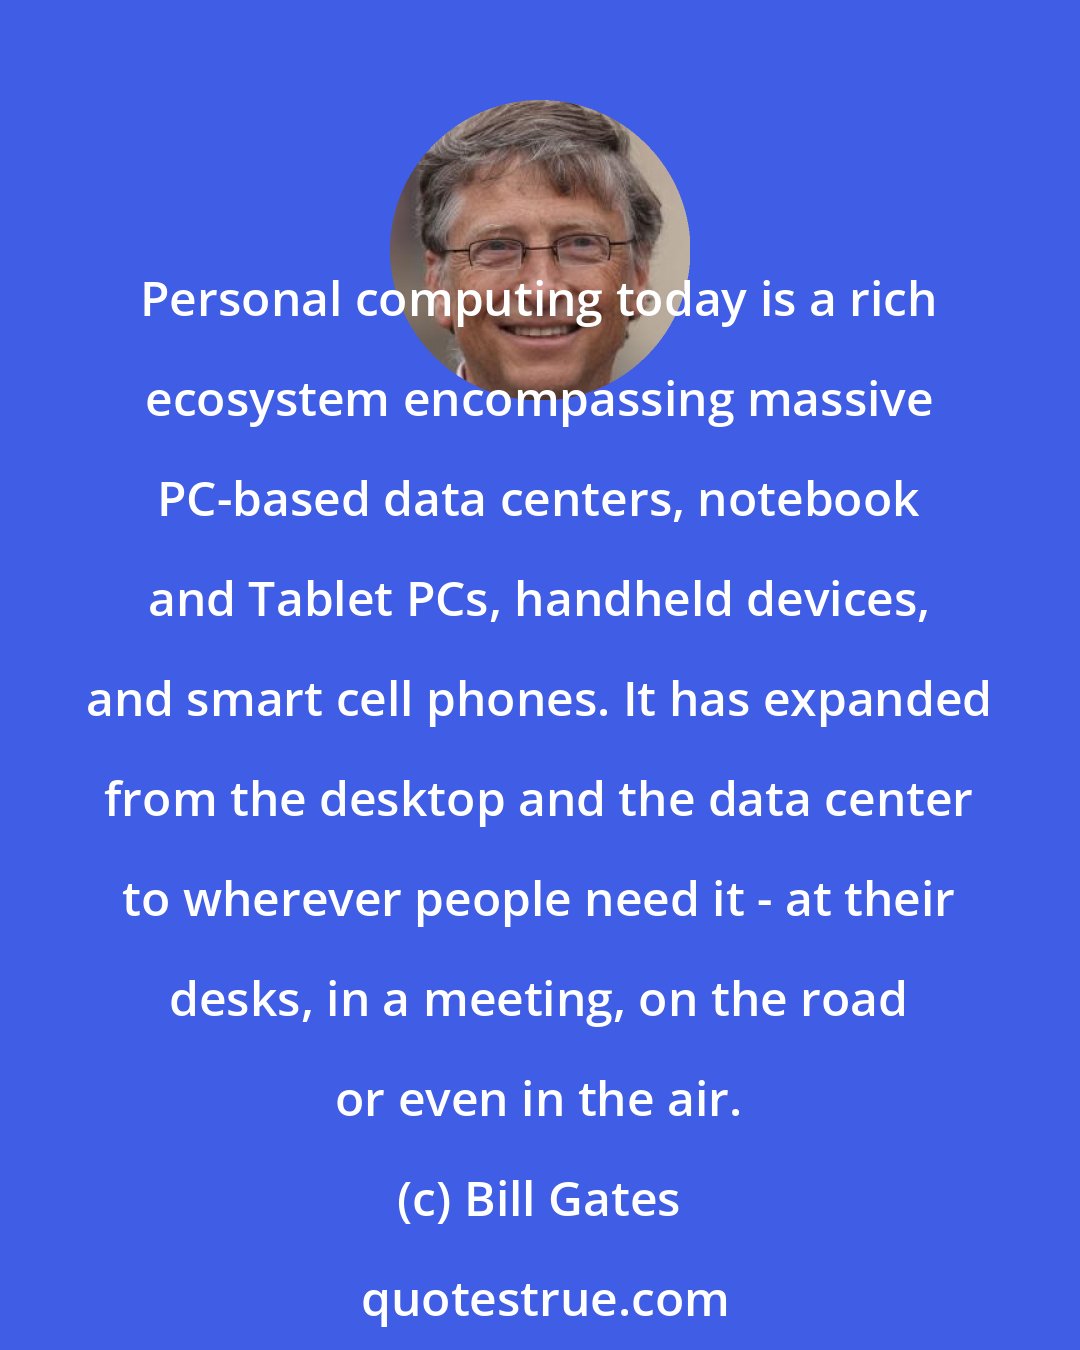 Bill Gates: Personal computing today is a rich ecosystem encompassing massive PC-based data centers, notebook and Tablet PCs, handheld devices, and smart cell phones. It has expanded from the desktop and the data center to wherever people need it - at their desks, in a meeting, on the road or even in the air.